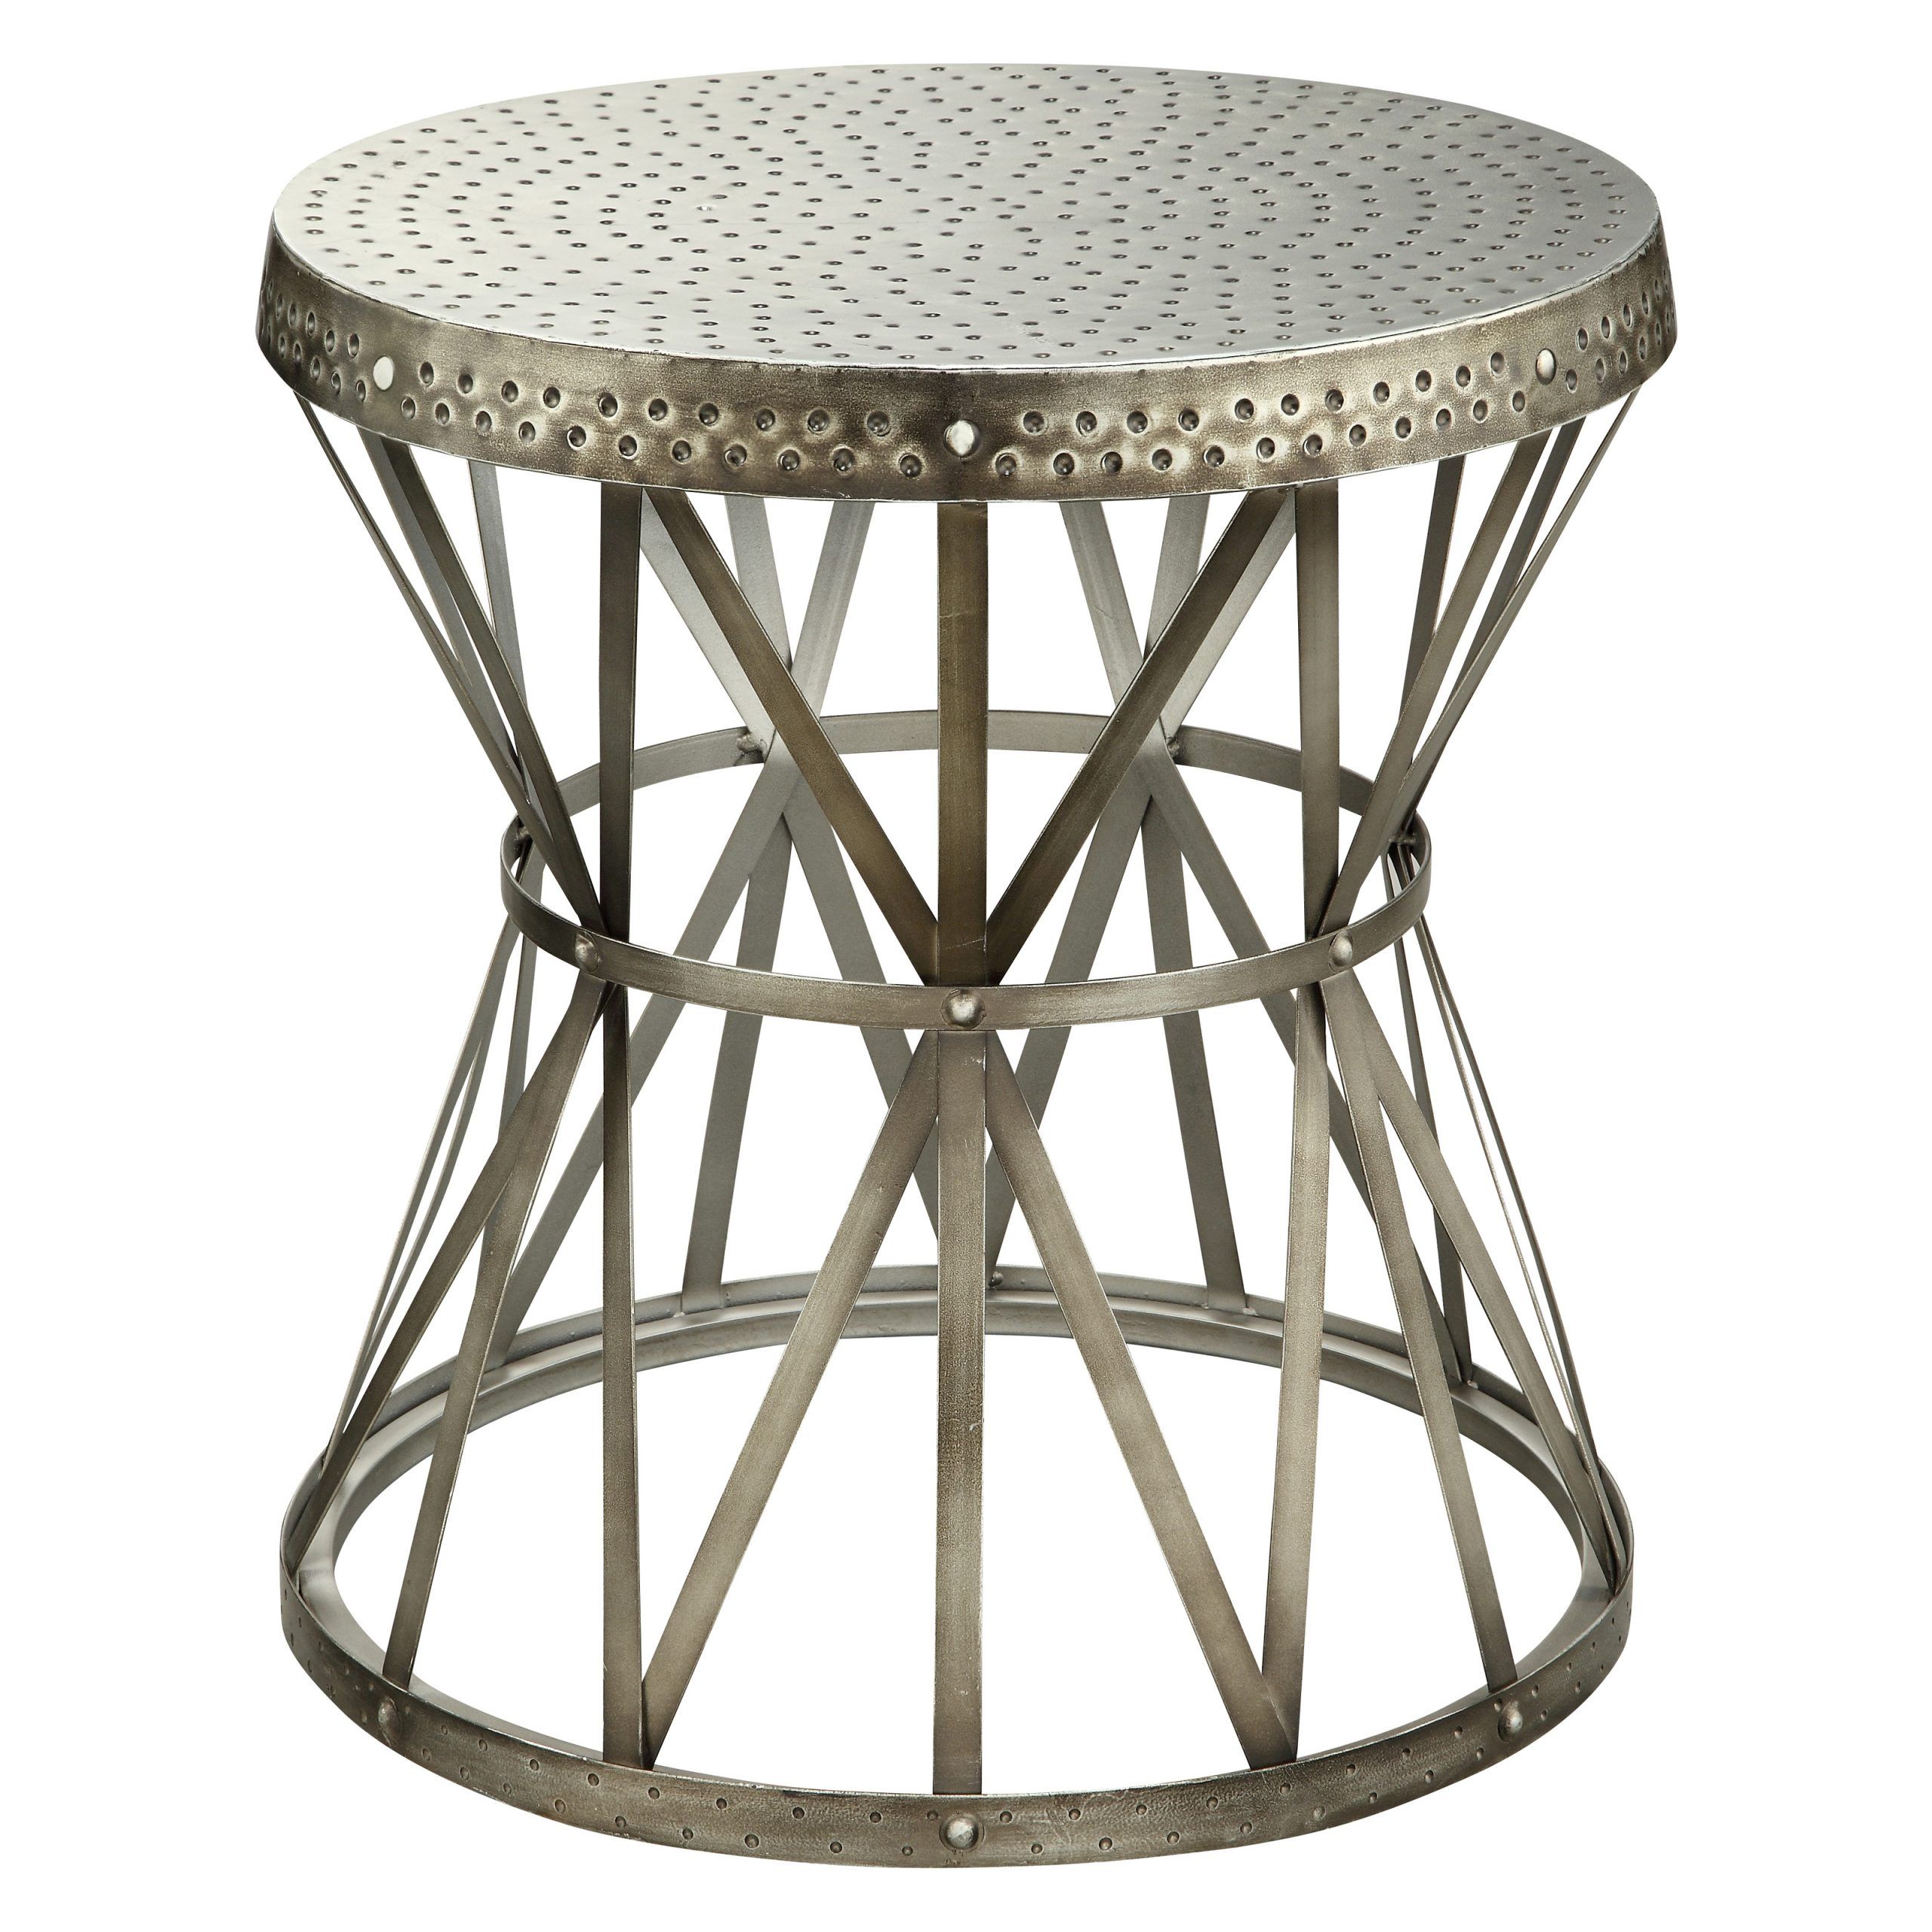 Wood And Steel Outdoor Side Tables With Favorite Coast To Coast 43329 Round Metal End Table – End Tables At Hayneedle (View 7 of 15)